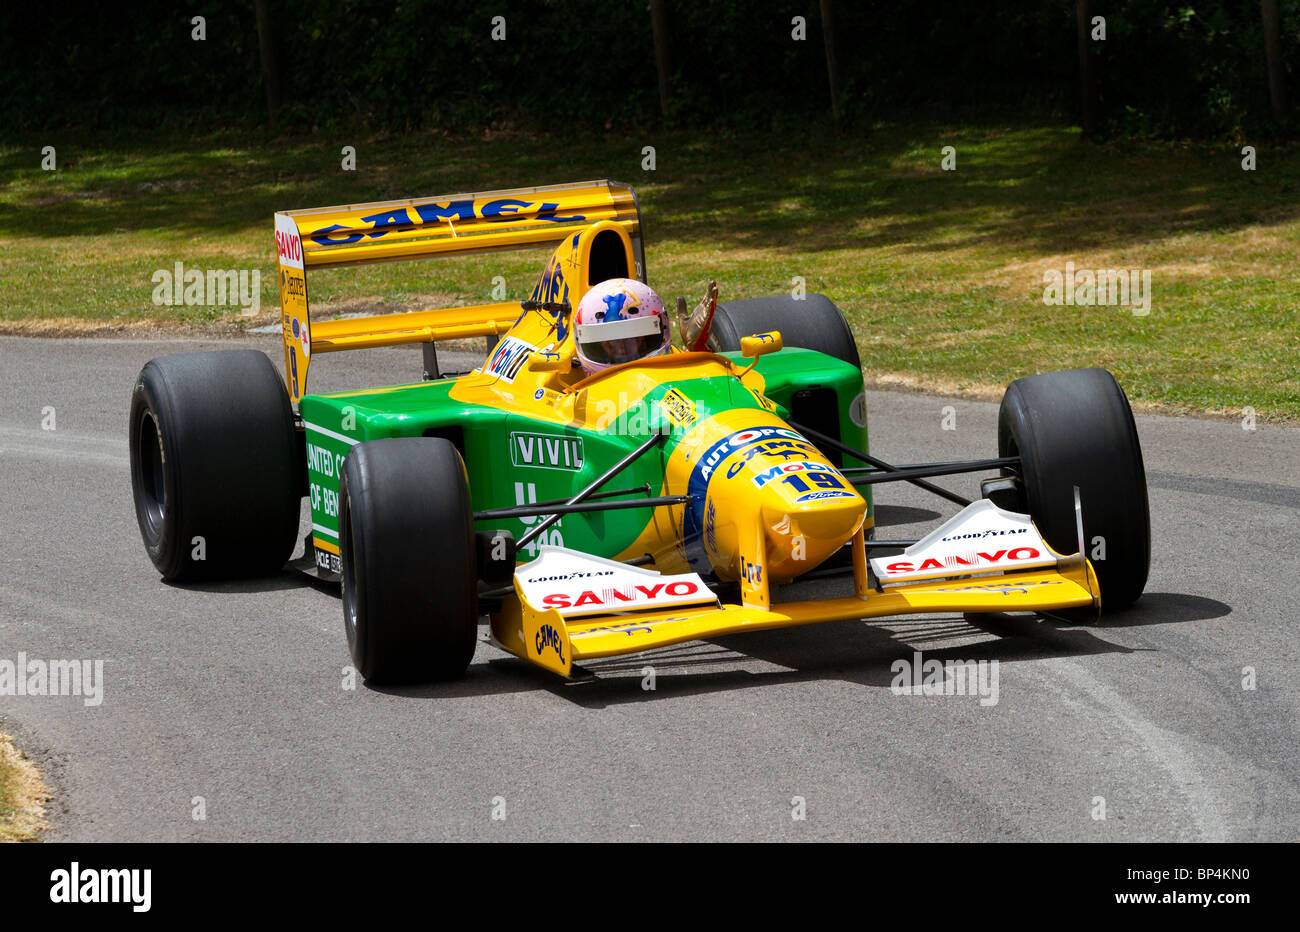 1992 Benetton-Ford B192 F1 car on the hillclimb at the 2010 Goodwood  Festival of Speed, Sussex, UK. Driver: Lorina McLaughlin Stock Photo - Alamy